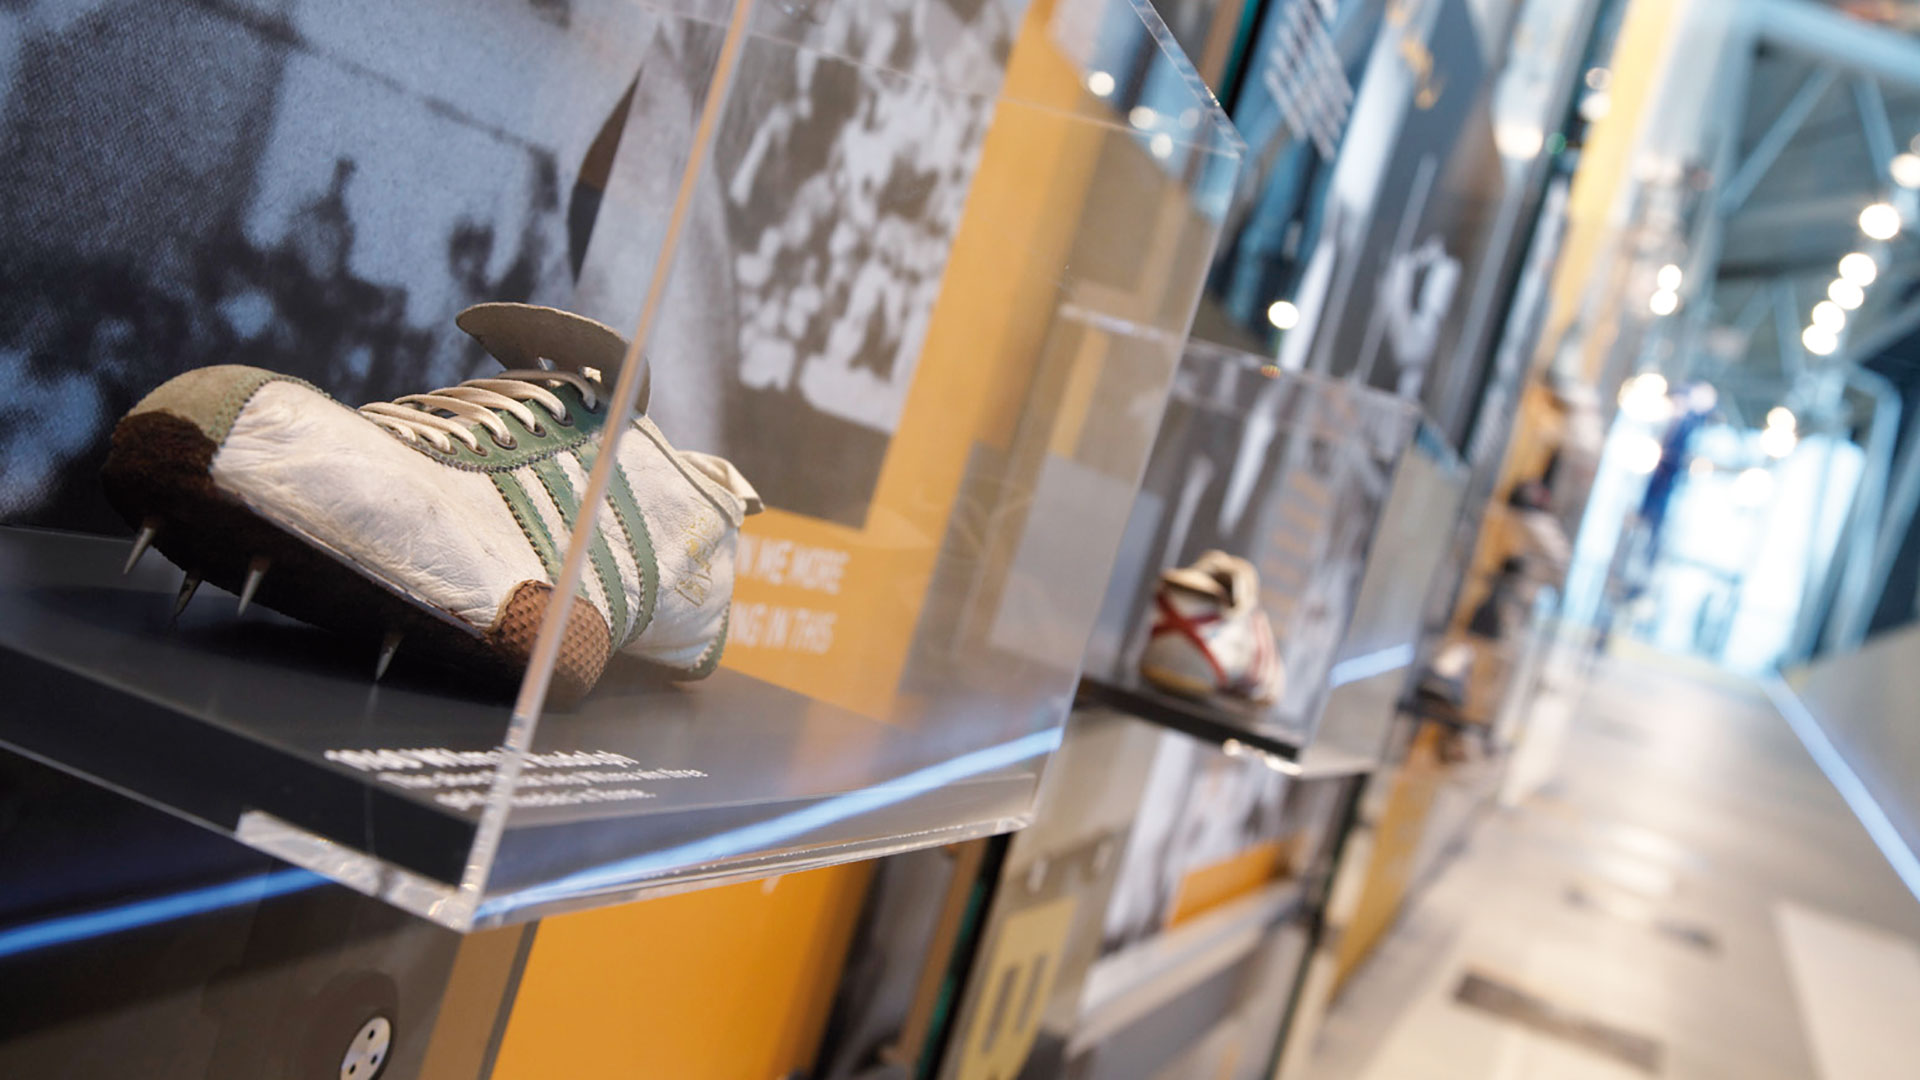 Dart stages the Walk of Fame 2007 exhibition for adidas